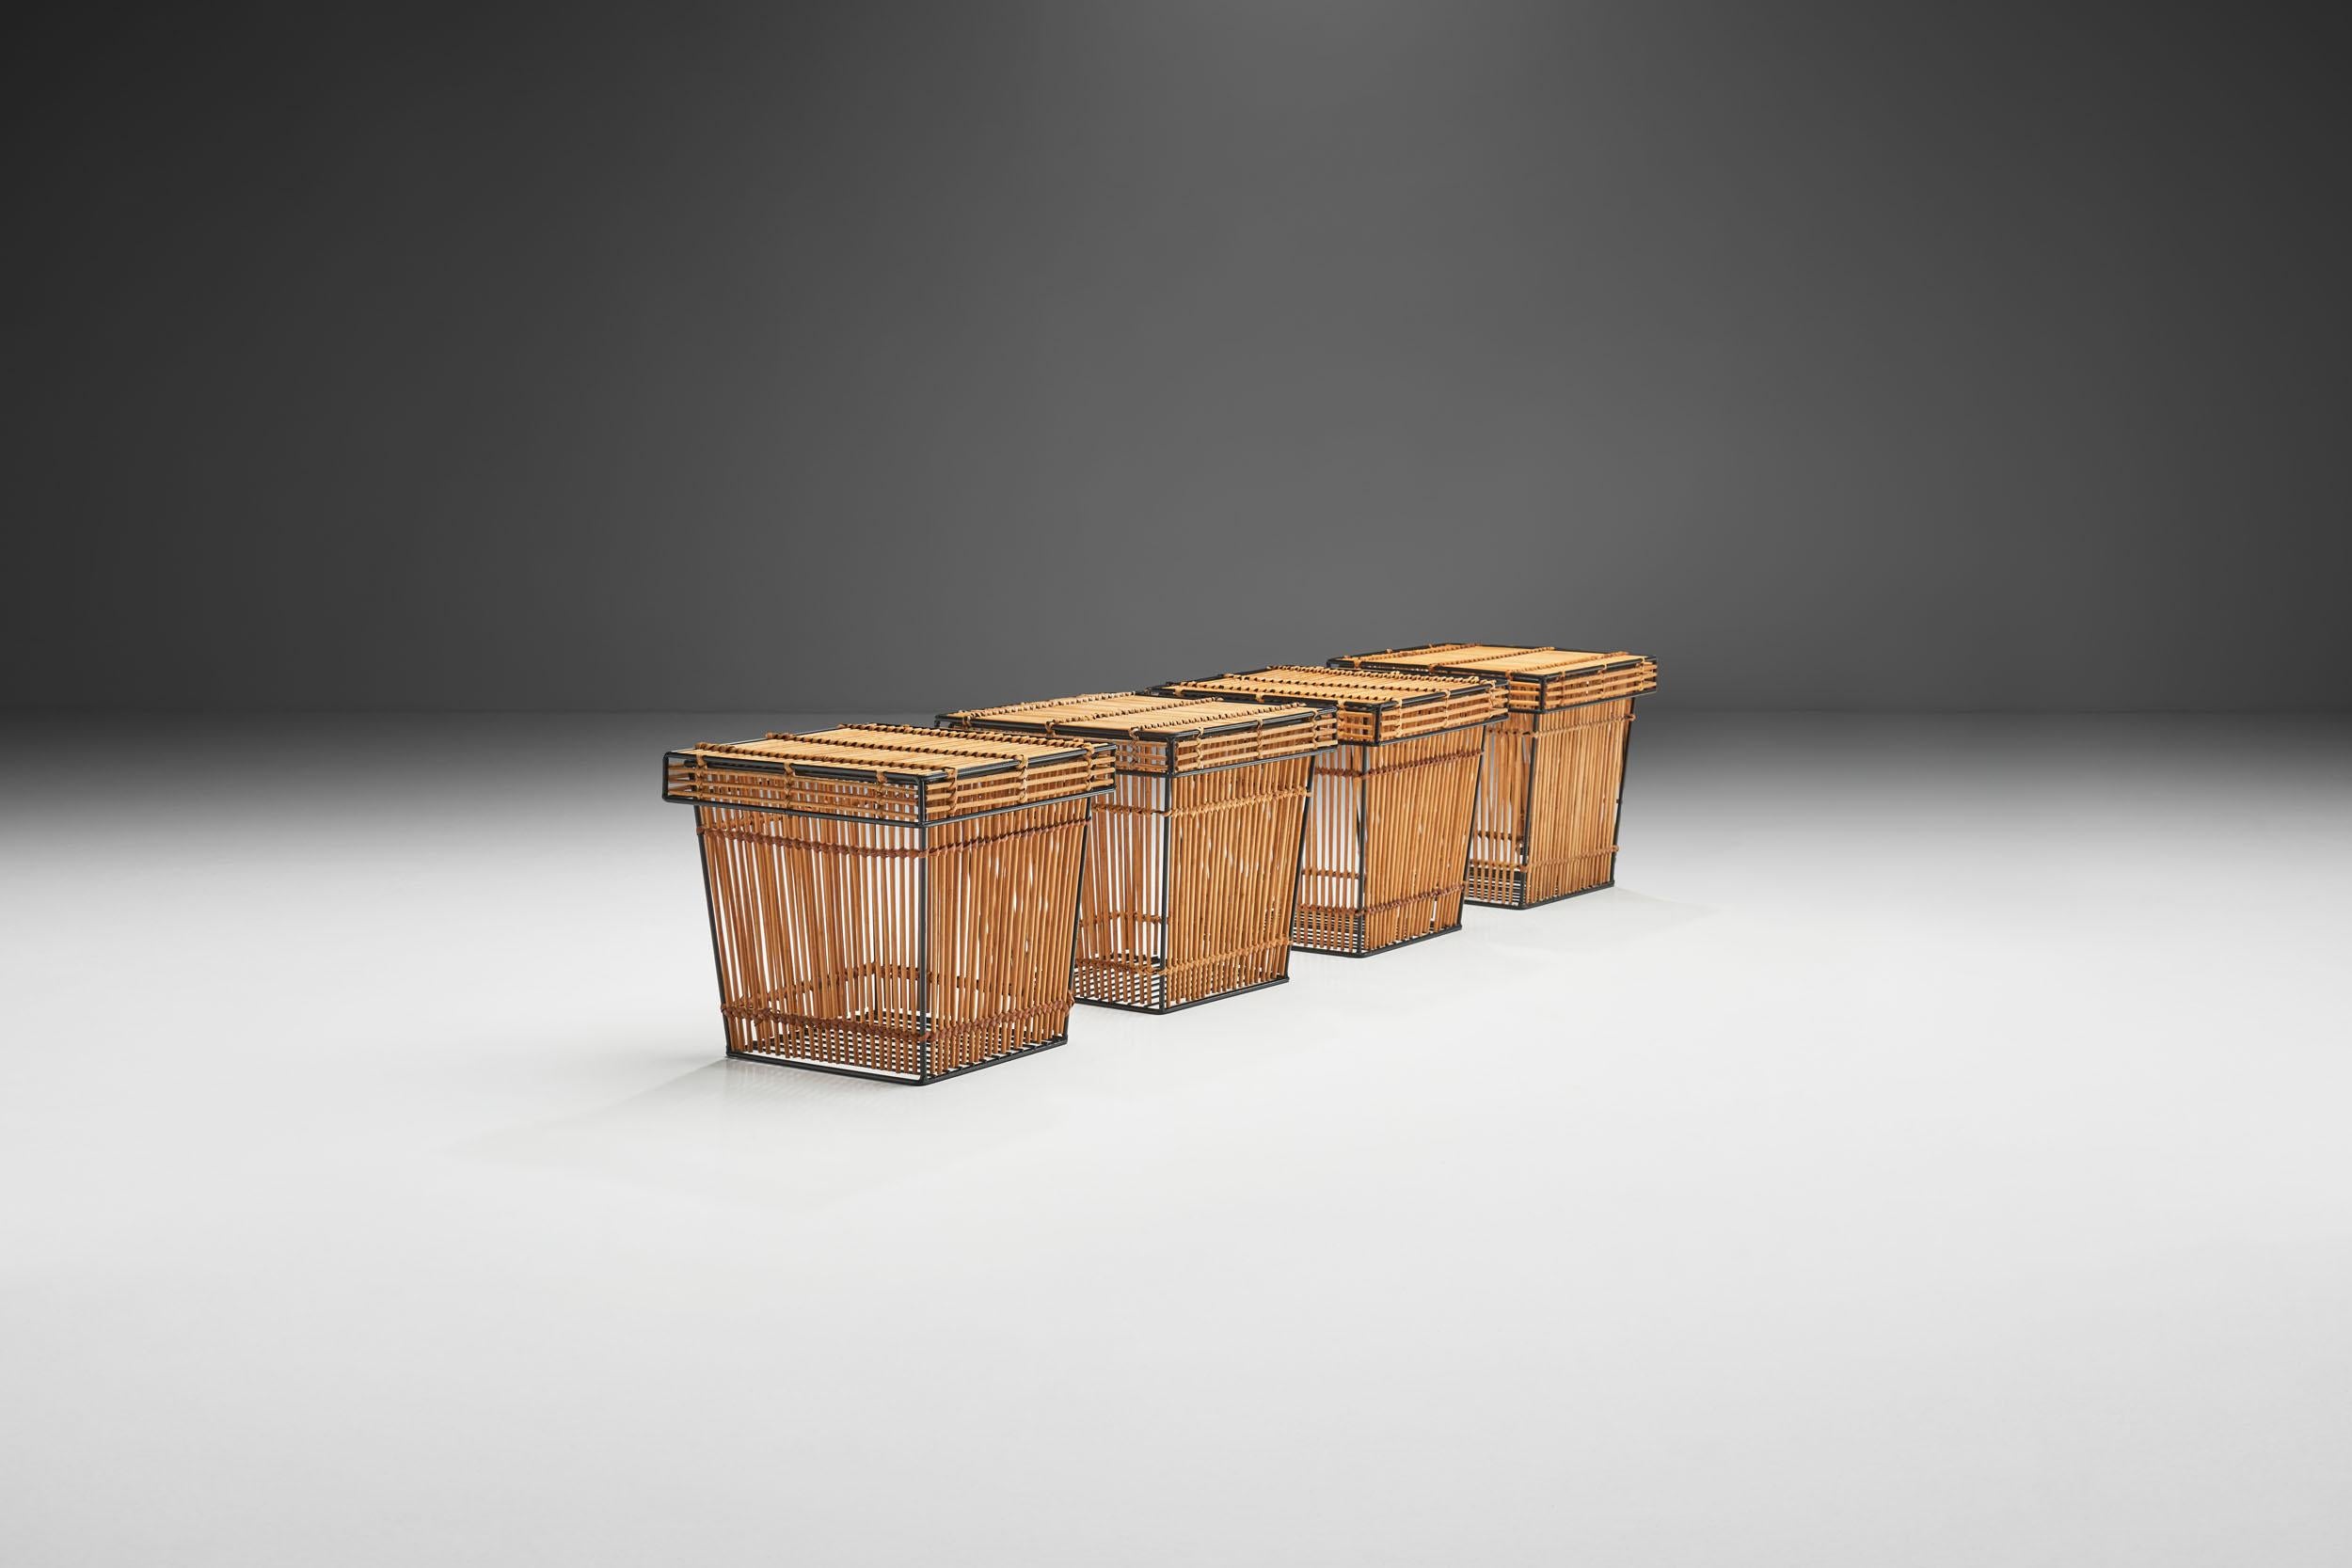 These rattan and steel baskets are attributed to Dutch designer, Dirk van Sliedregt, and were manufactured by Rohé Noordwolde in the 1960s.

Each Rohé basket has a metal structure covered in wicker. The organic material is carefully woven around